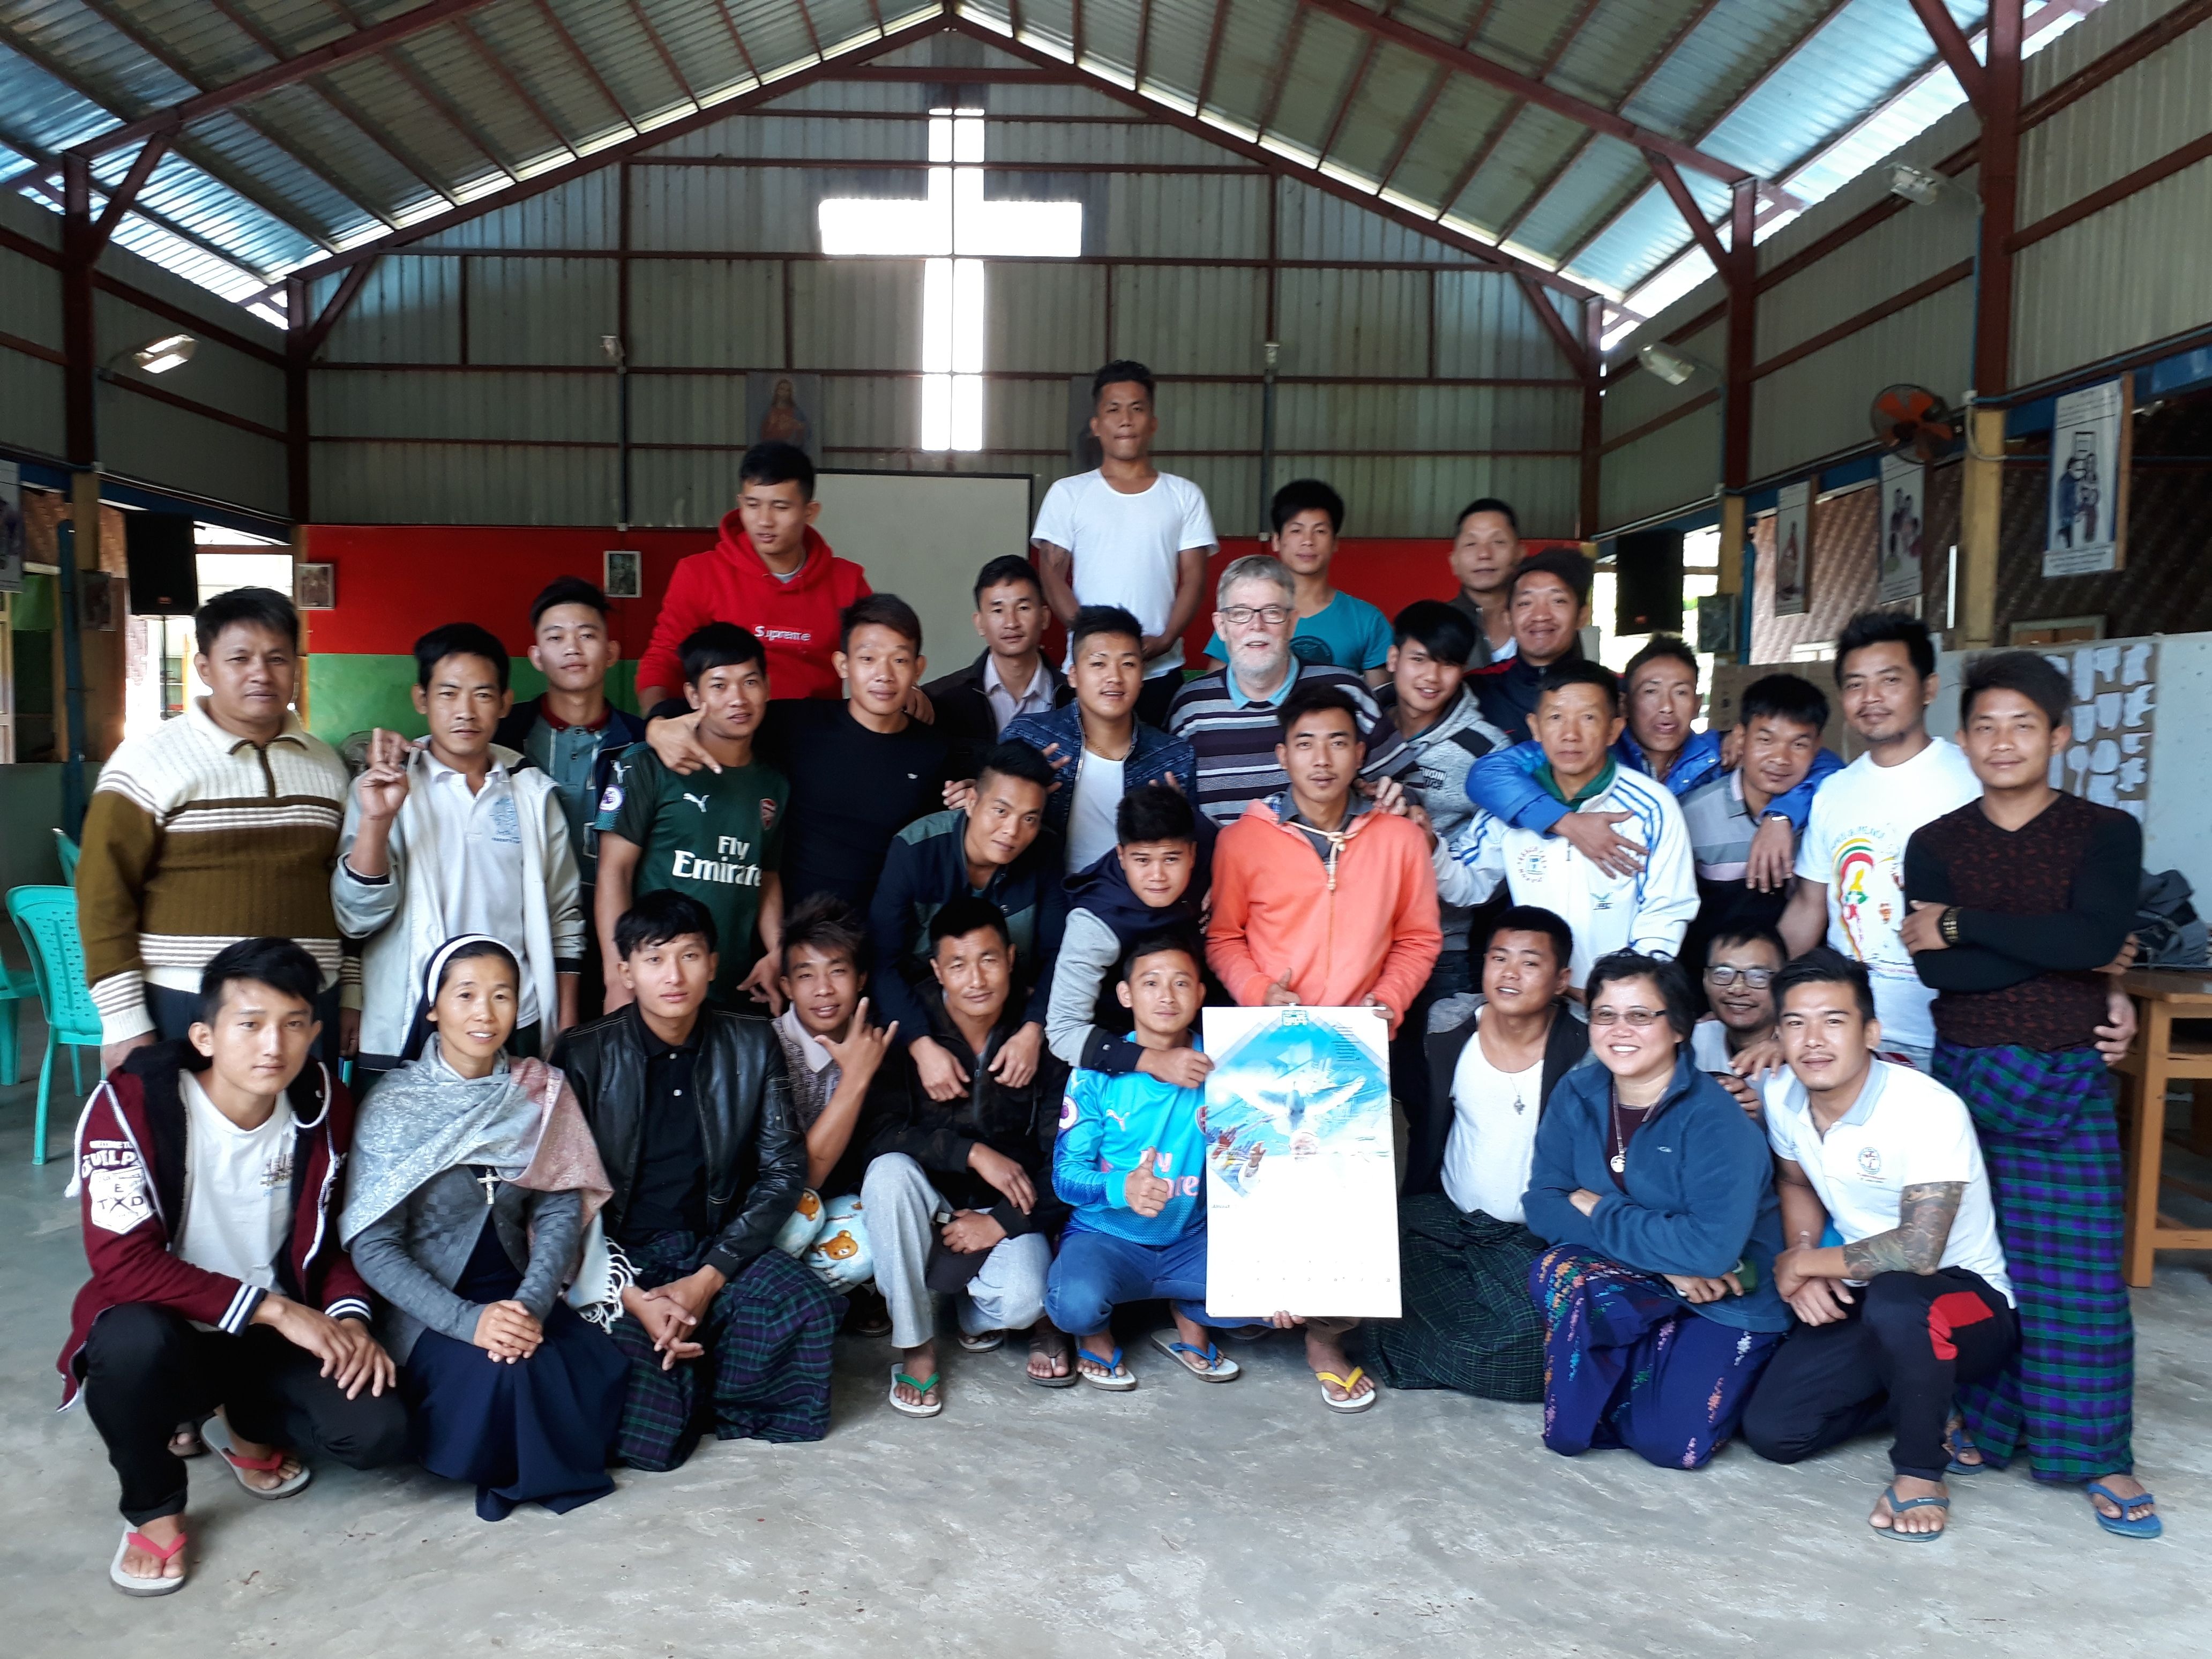 Columban GC calls for Justice and Peace in Kachin State, Myanmar